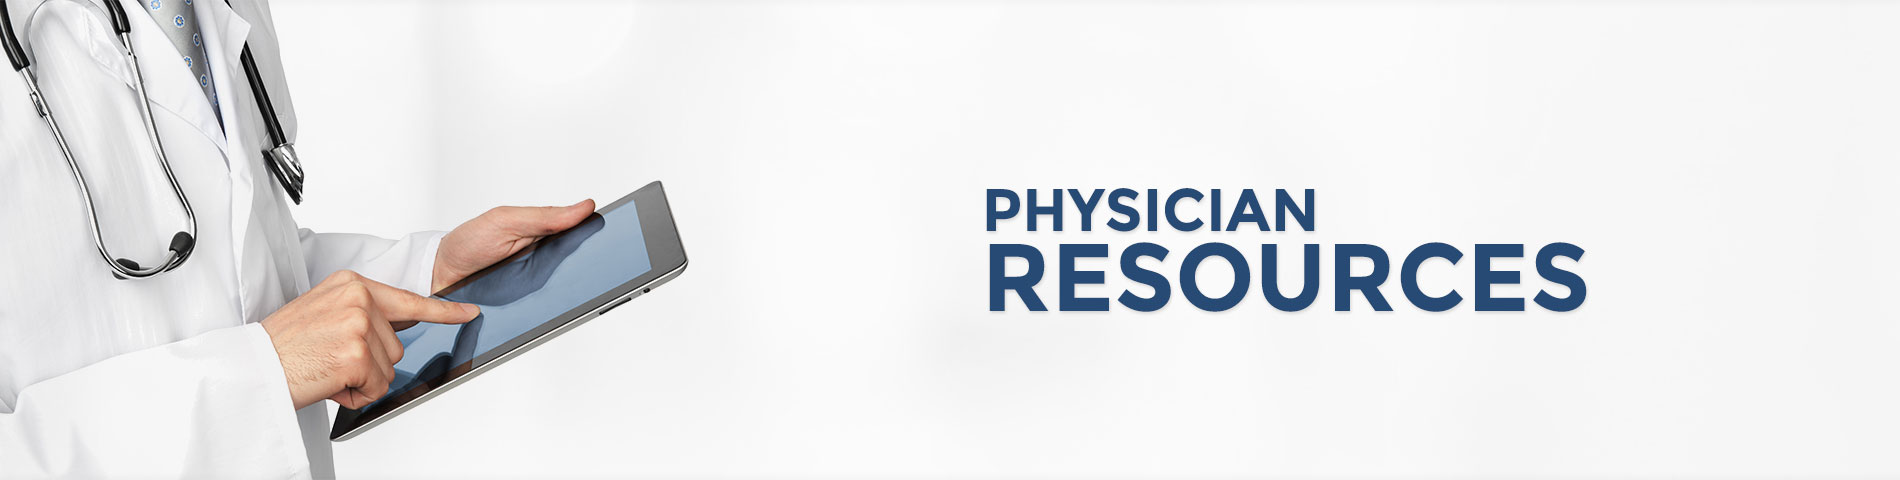 Physician Resources